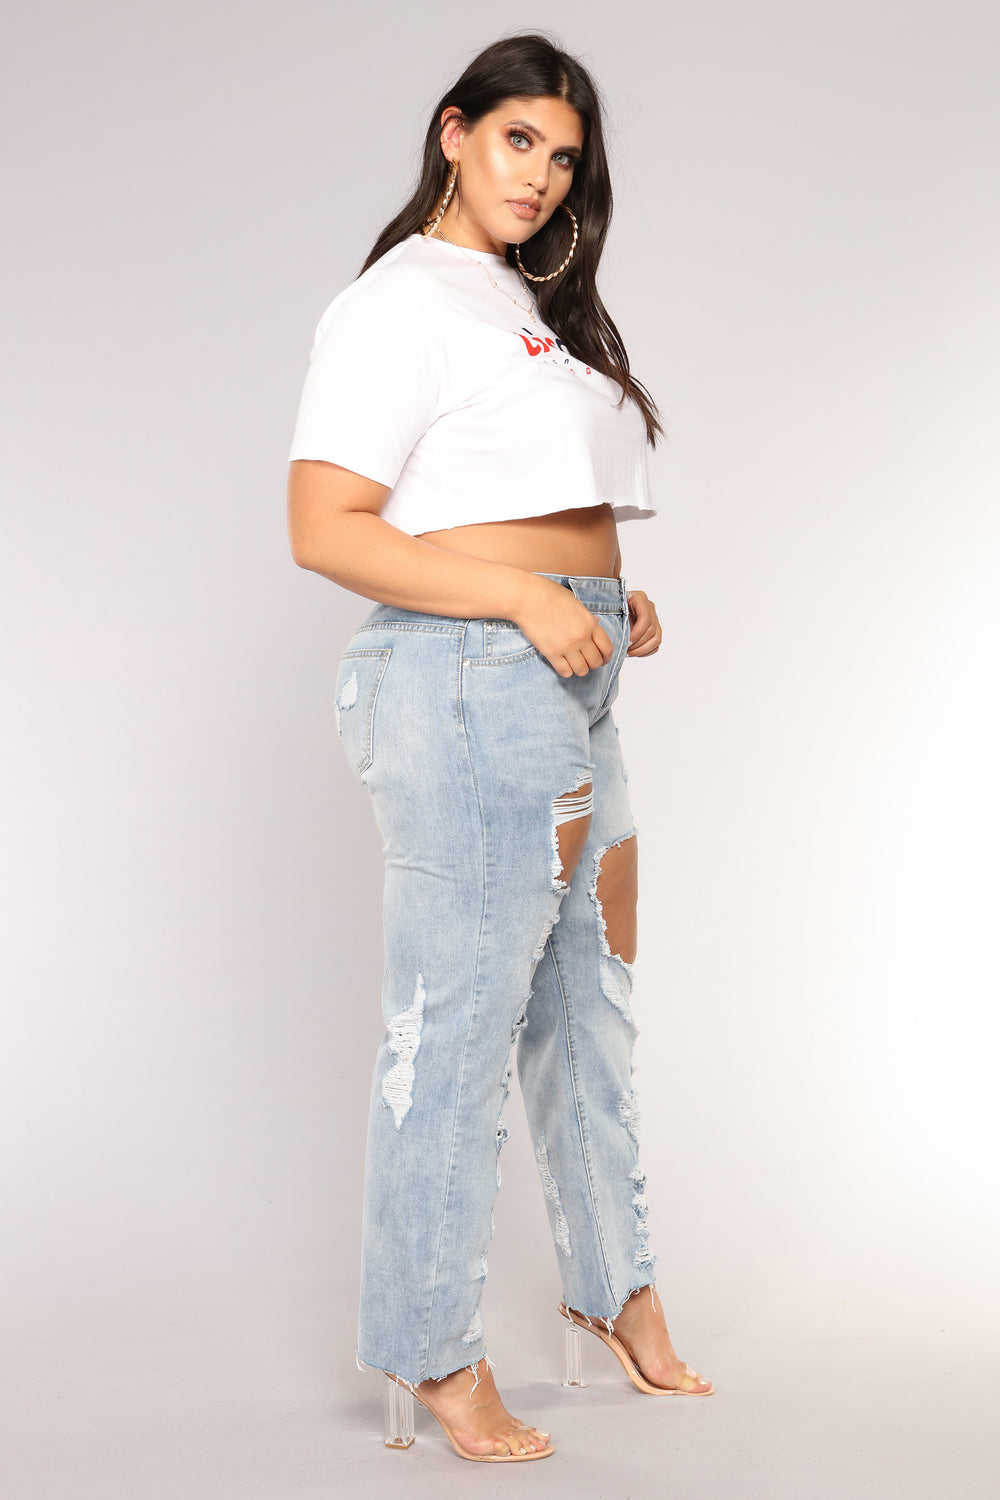 Tres Chic Cropped Top - White